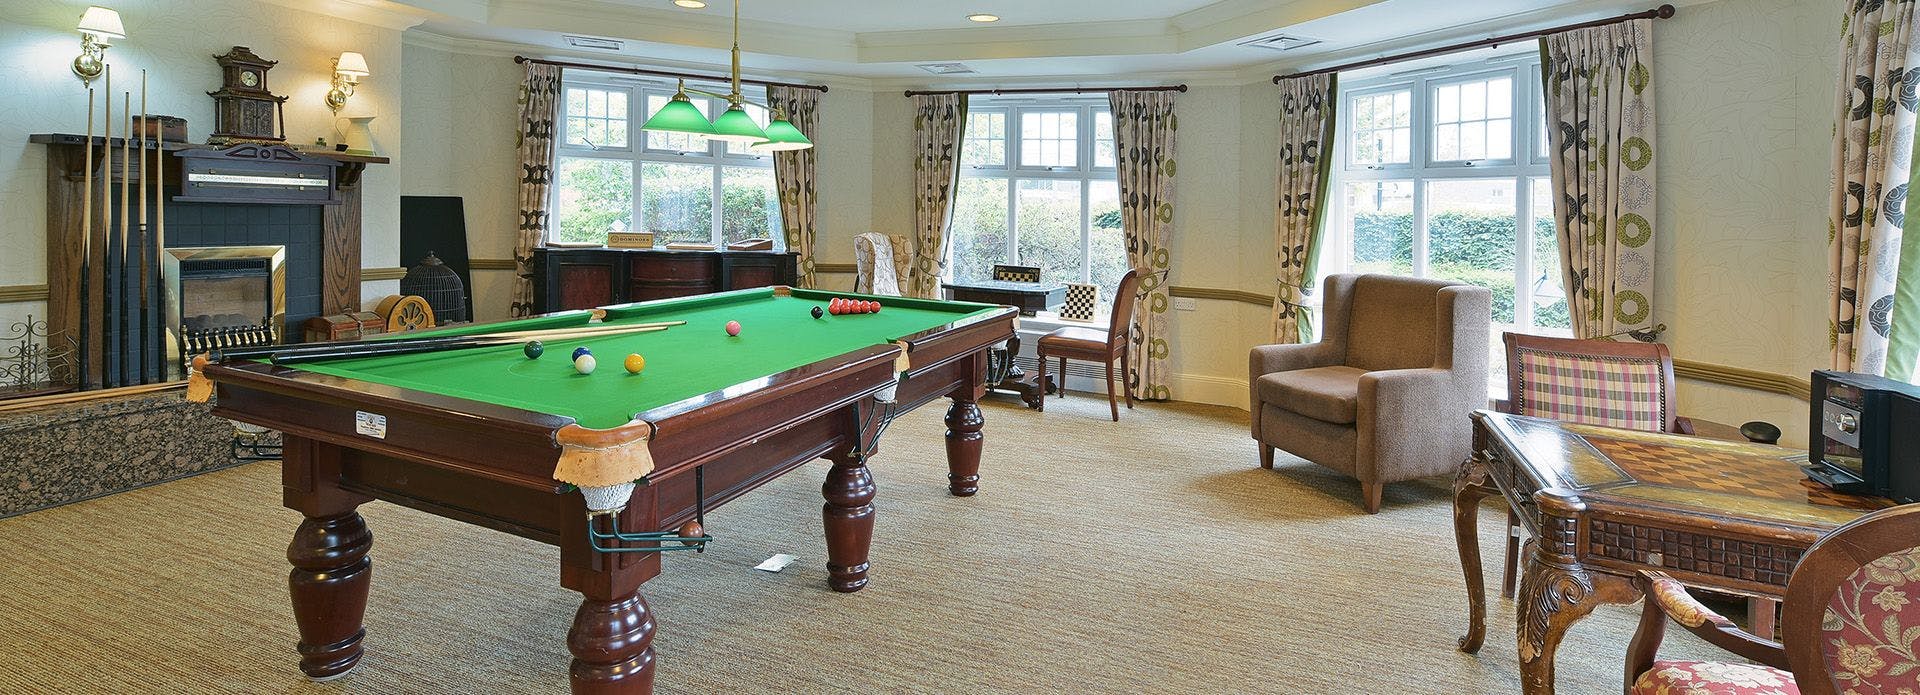 Activity Room at Guilford House Care Home in Guilford, Surrey